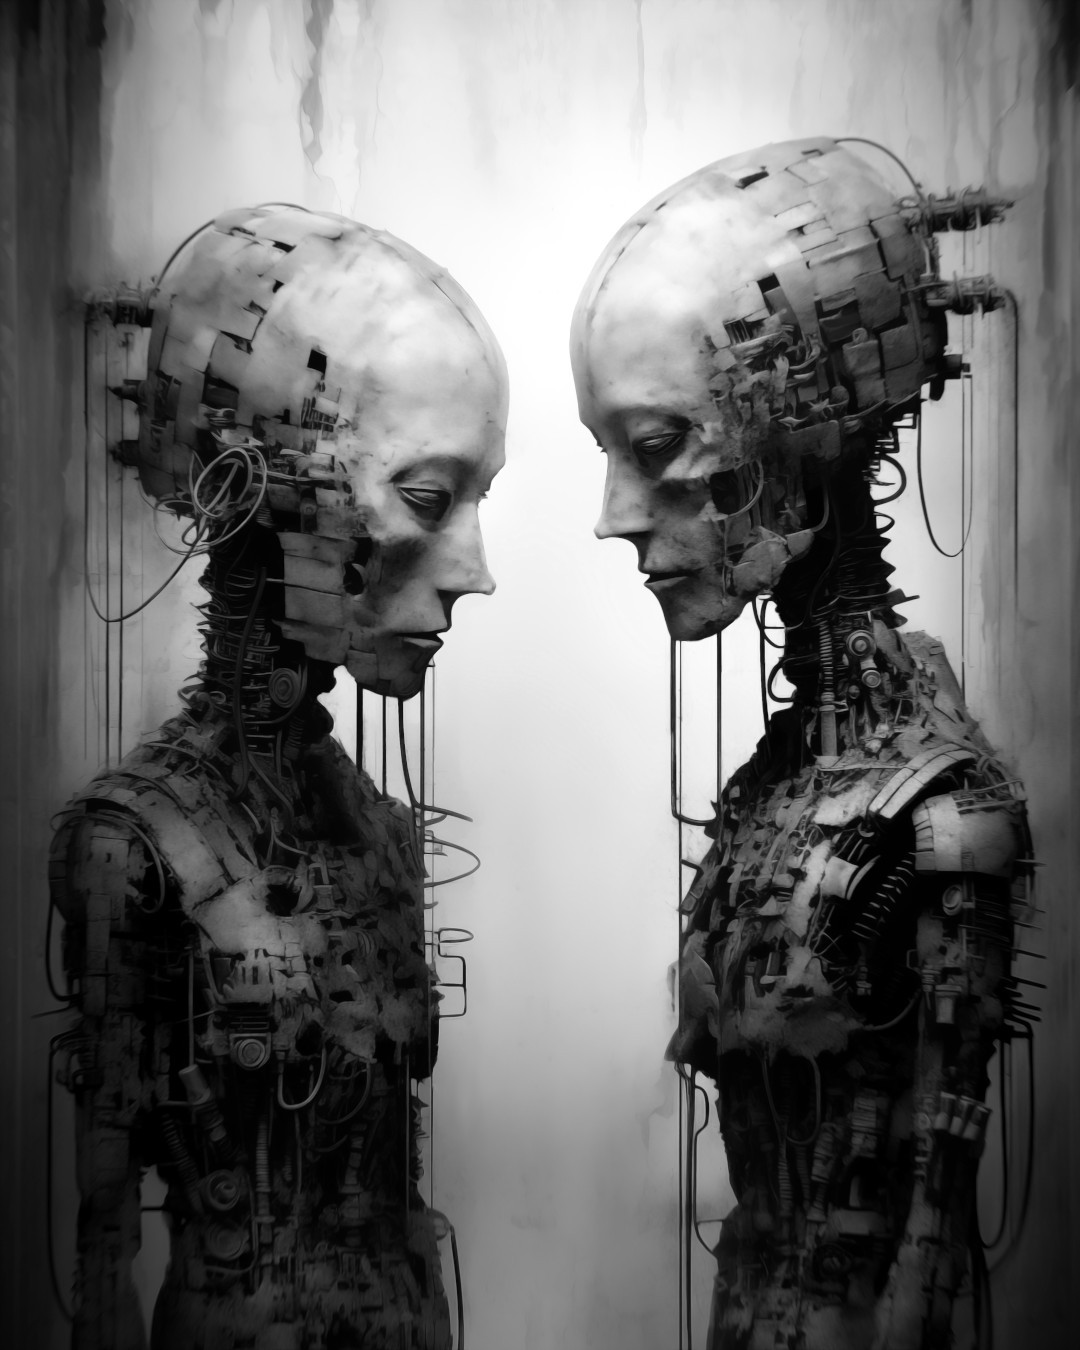 Two robot faces facing each other, cyberpunk realism, black and white intimacy